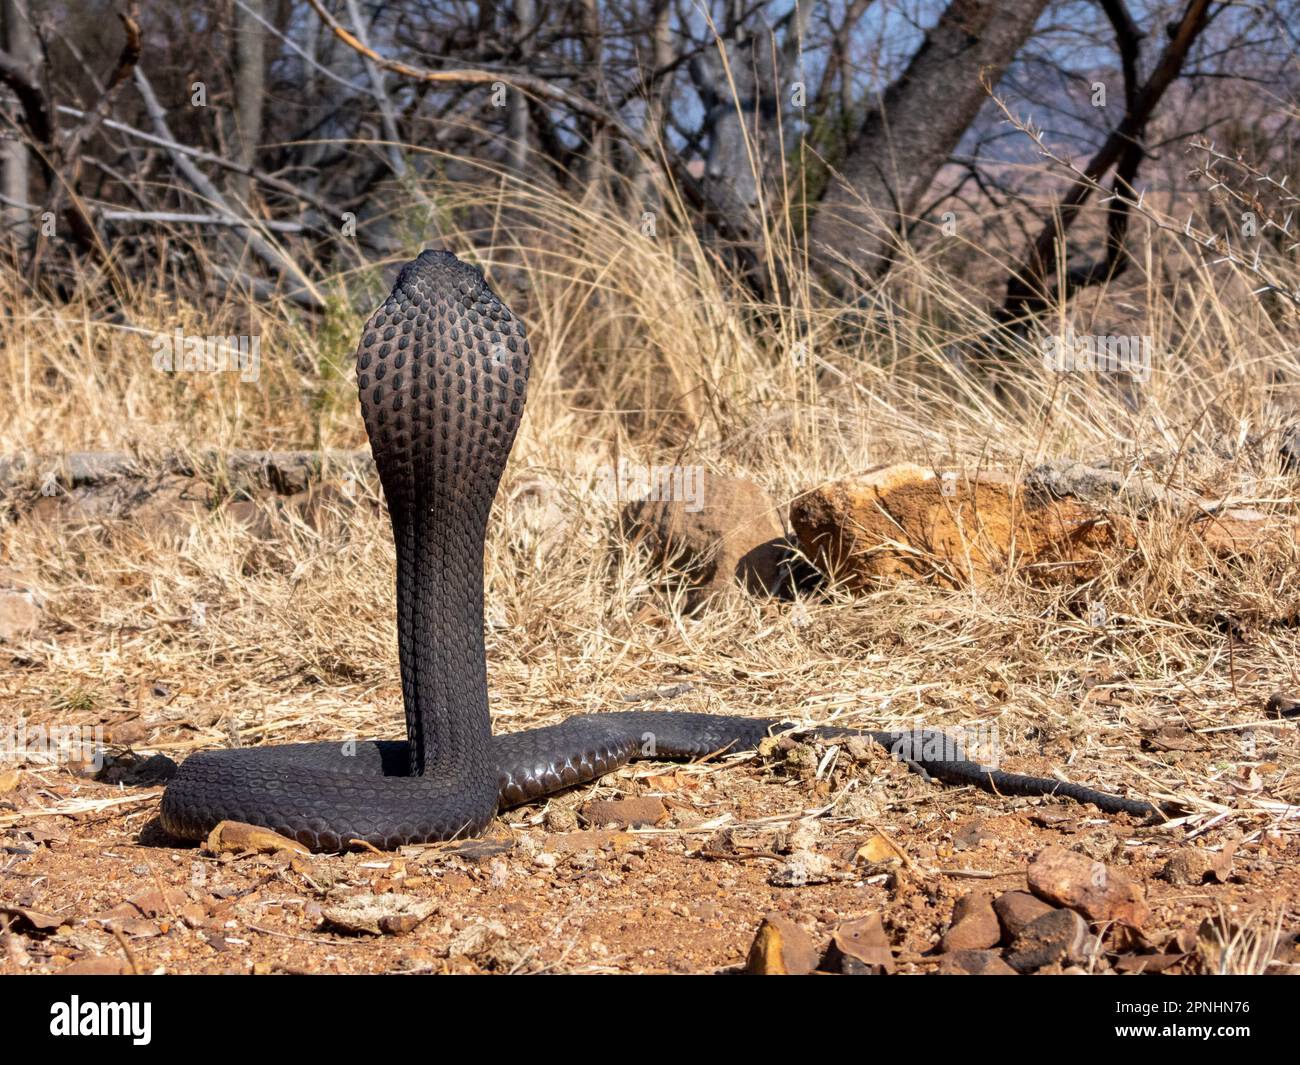 A Rinkhals, a dangerously venomous spitting snake from South Africa. Stock Photo